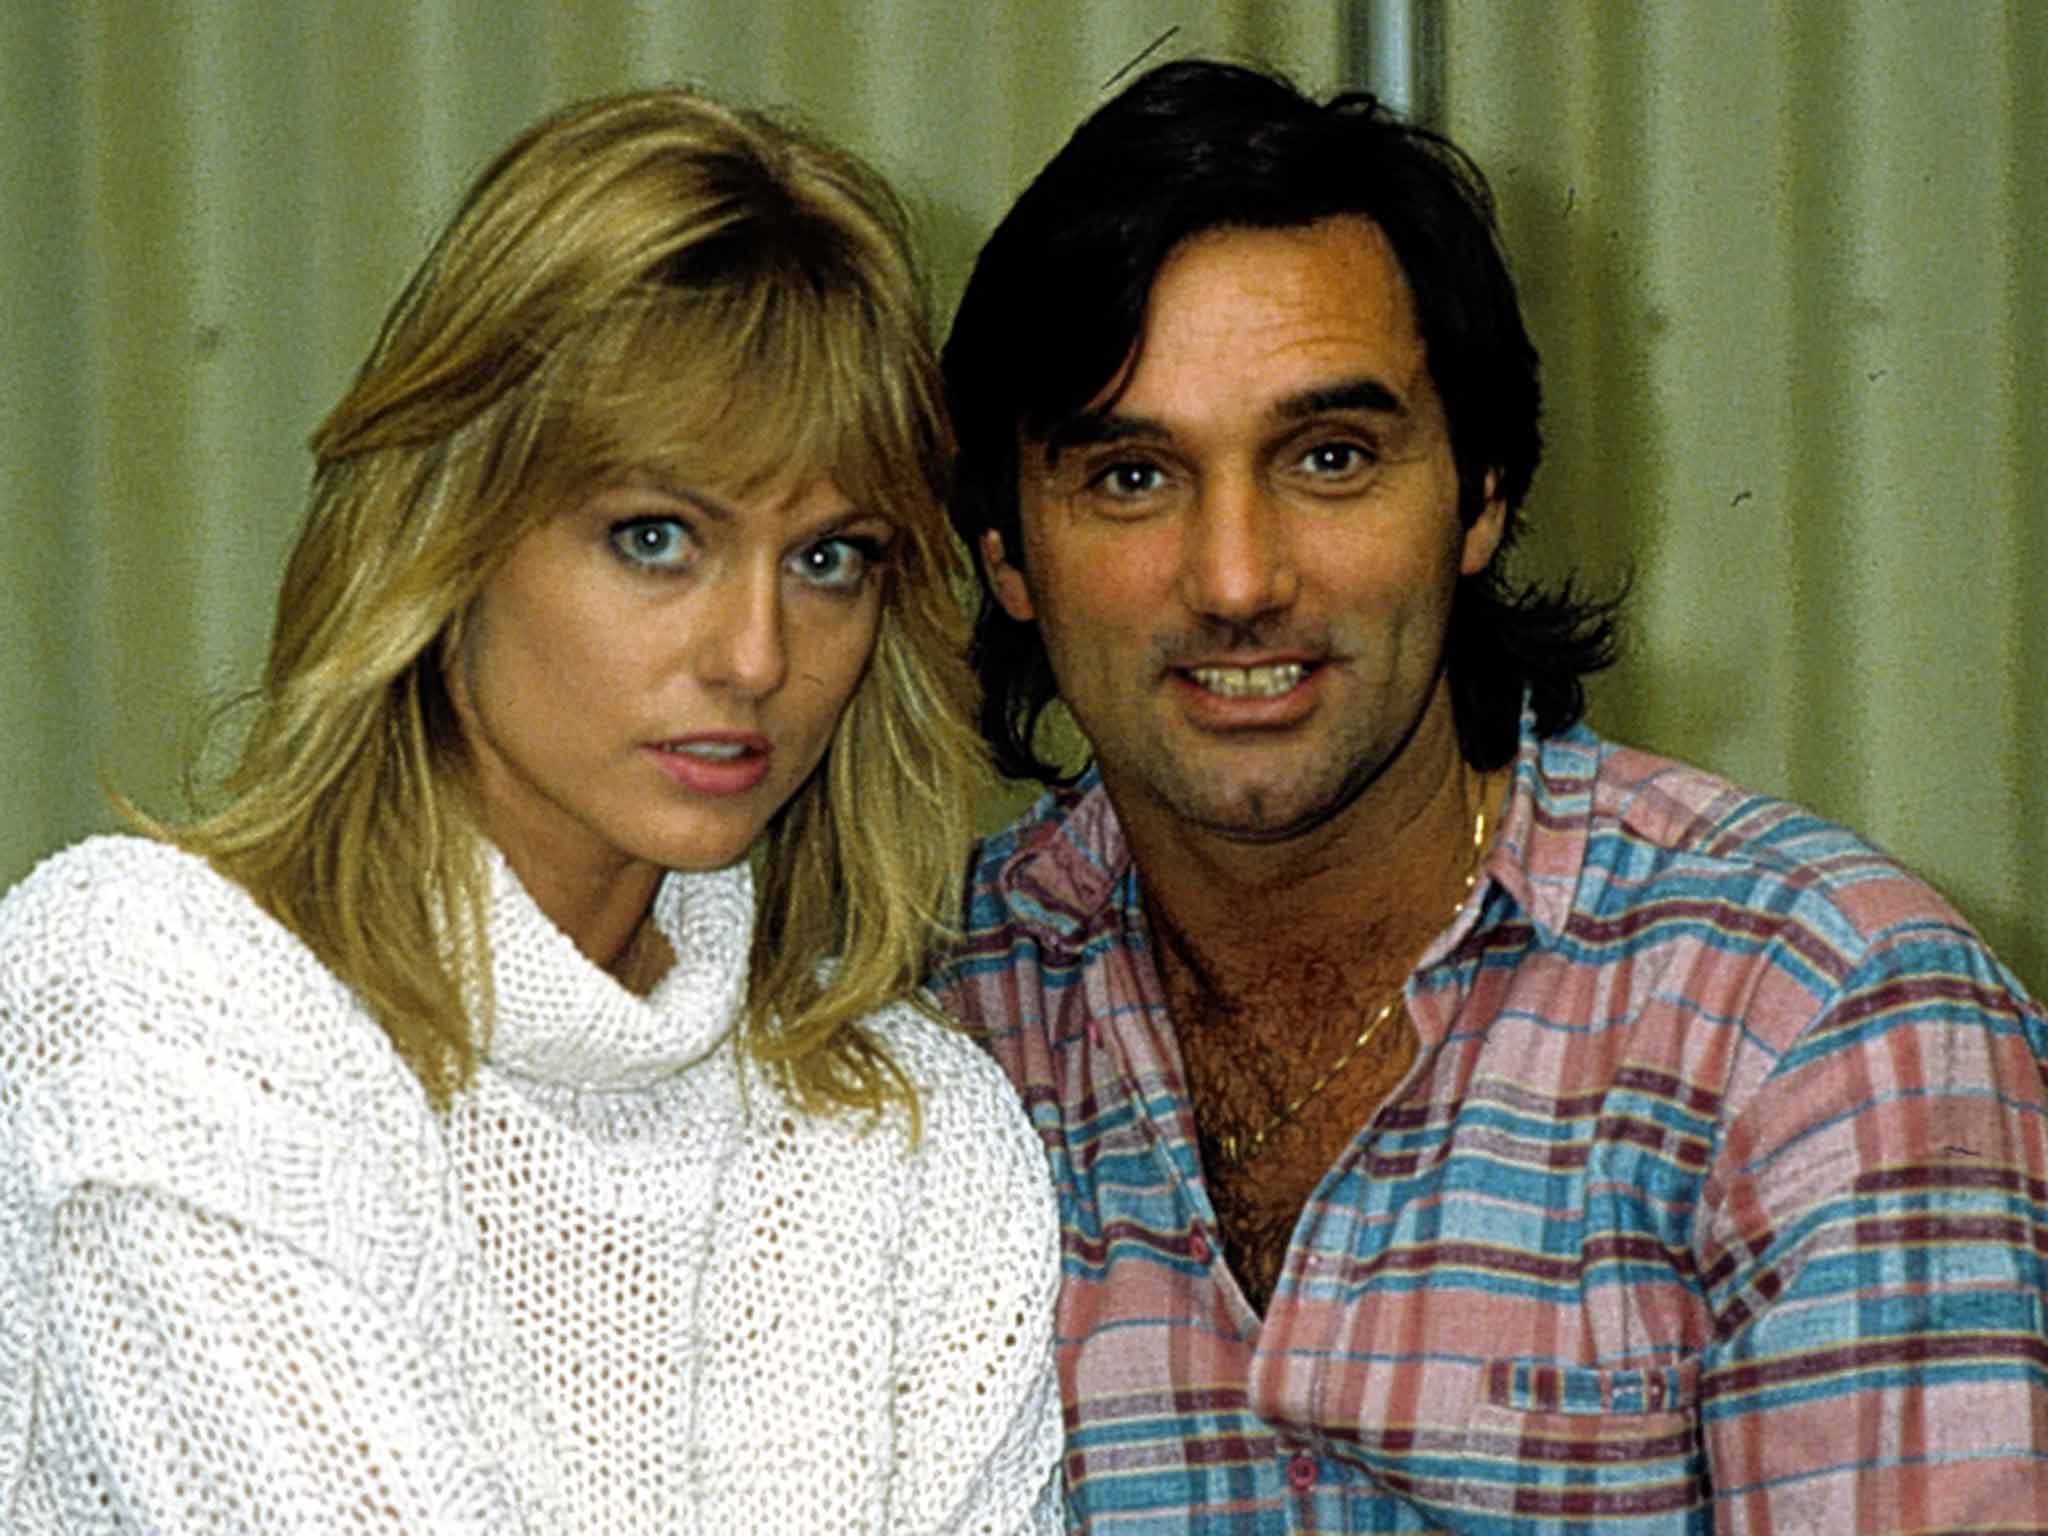 Chain reaction: George Best with the former Miss World Mary Stavin in 1983